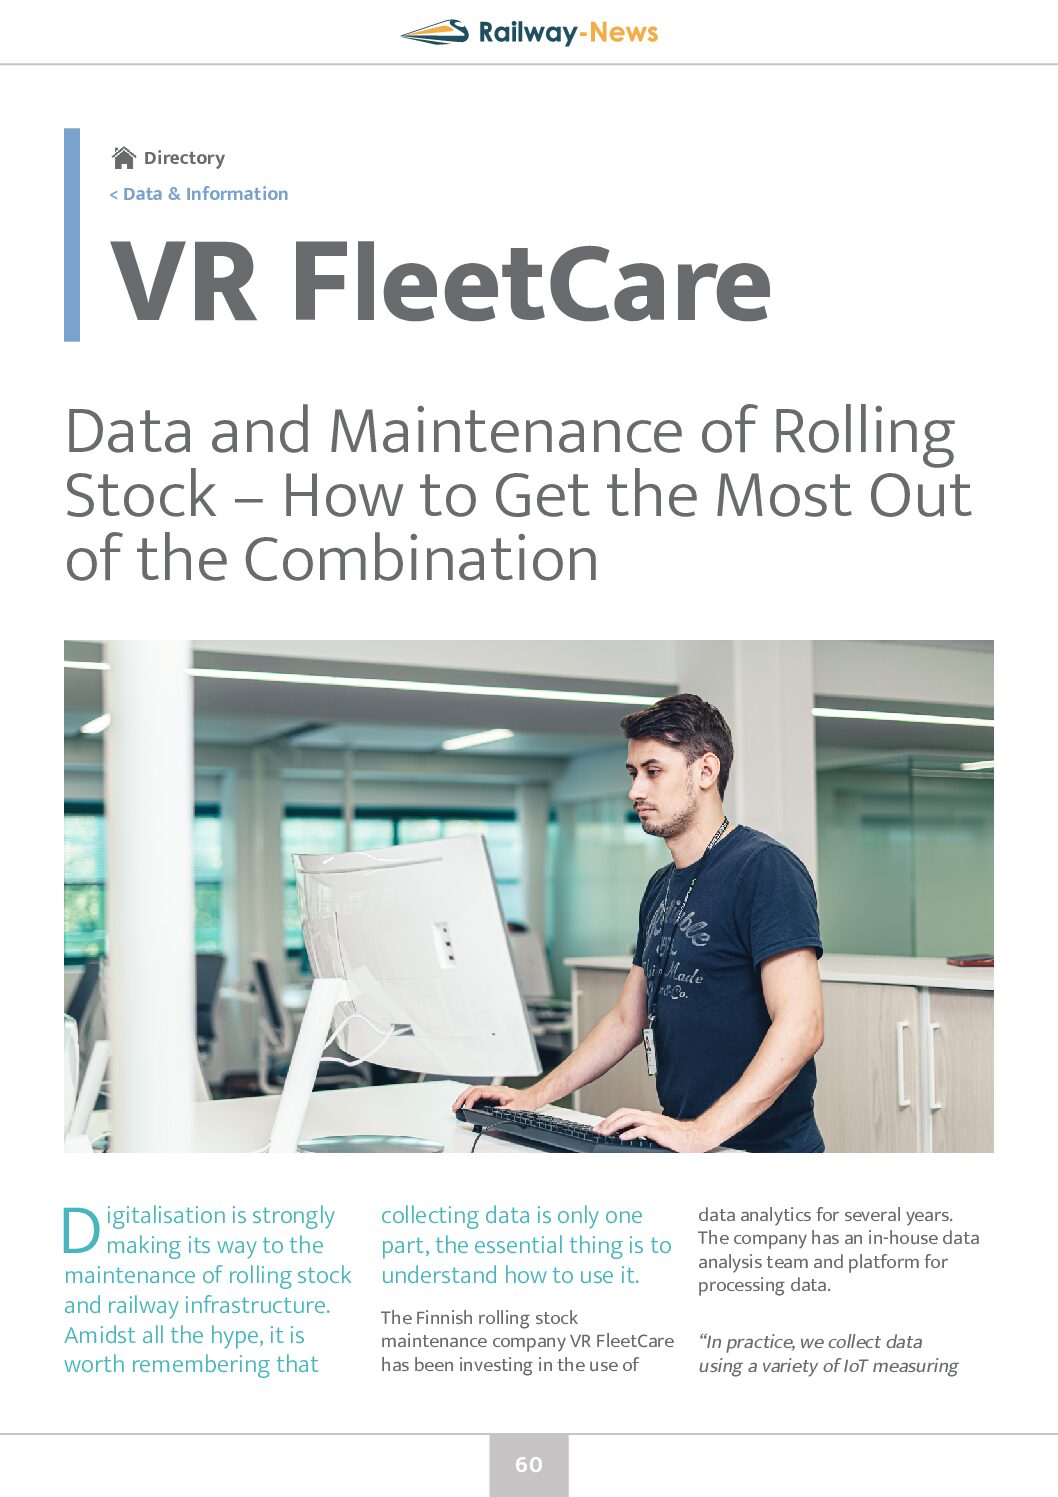 VR Fleetcare – Data and Maintenance of Rolling Stock